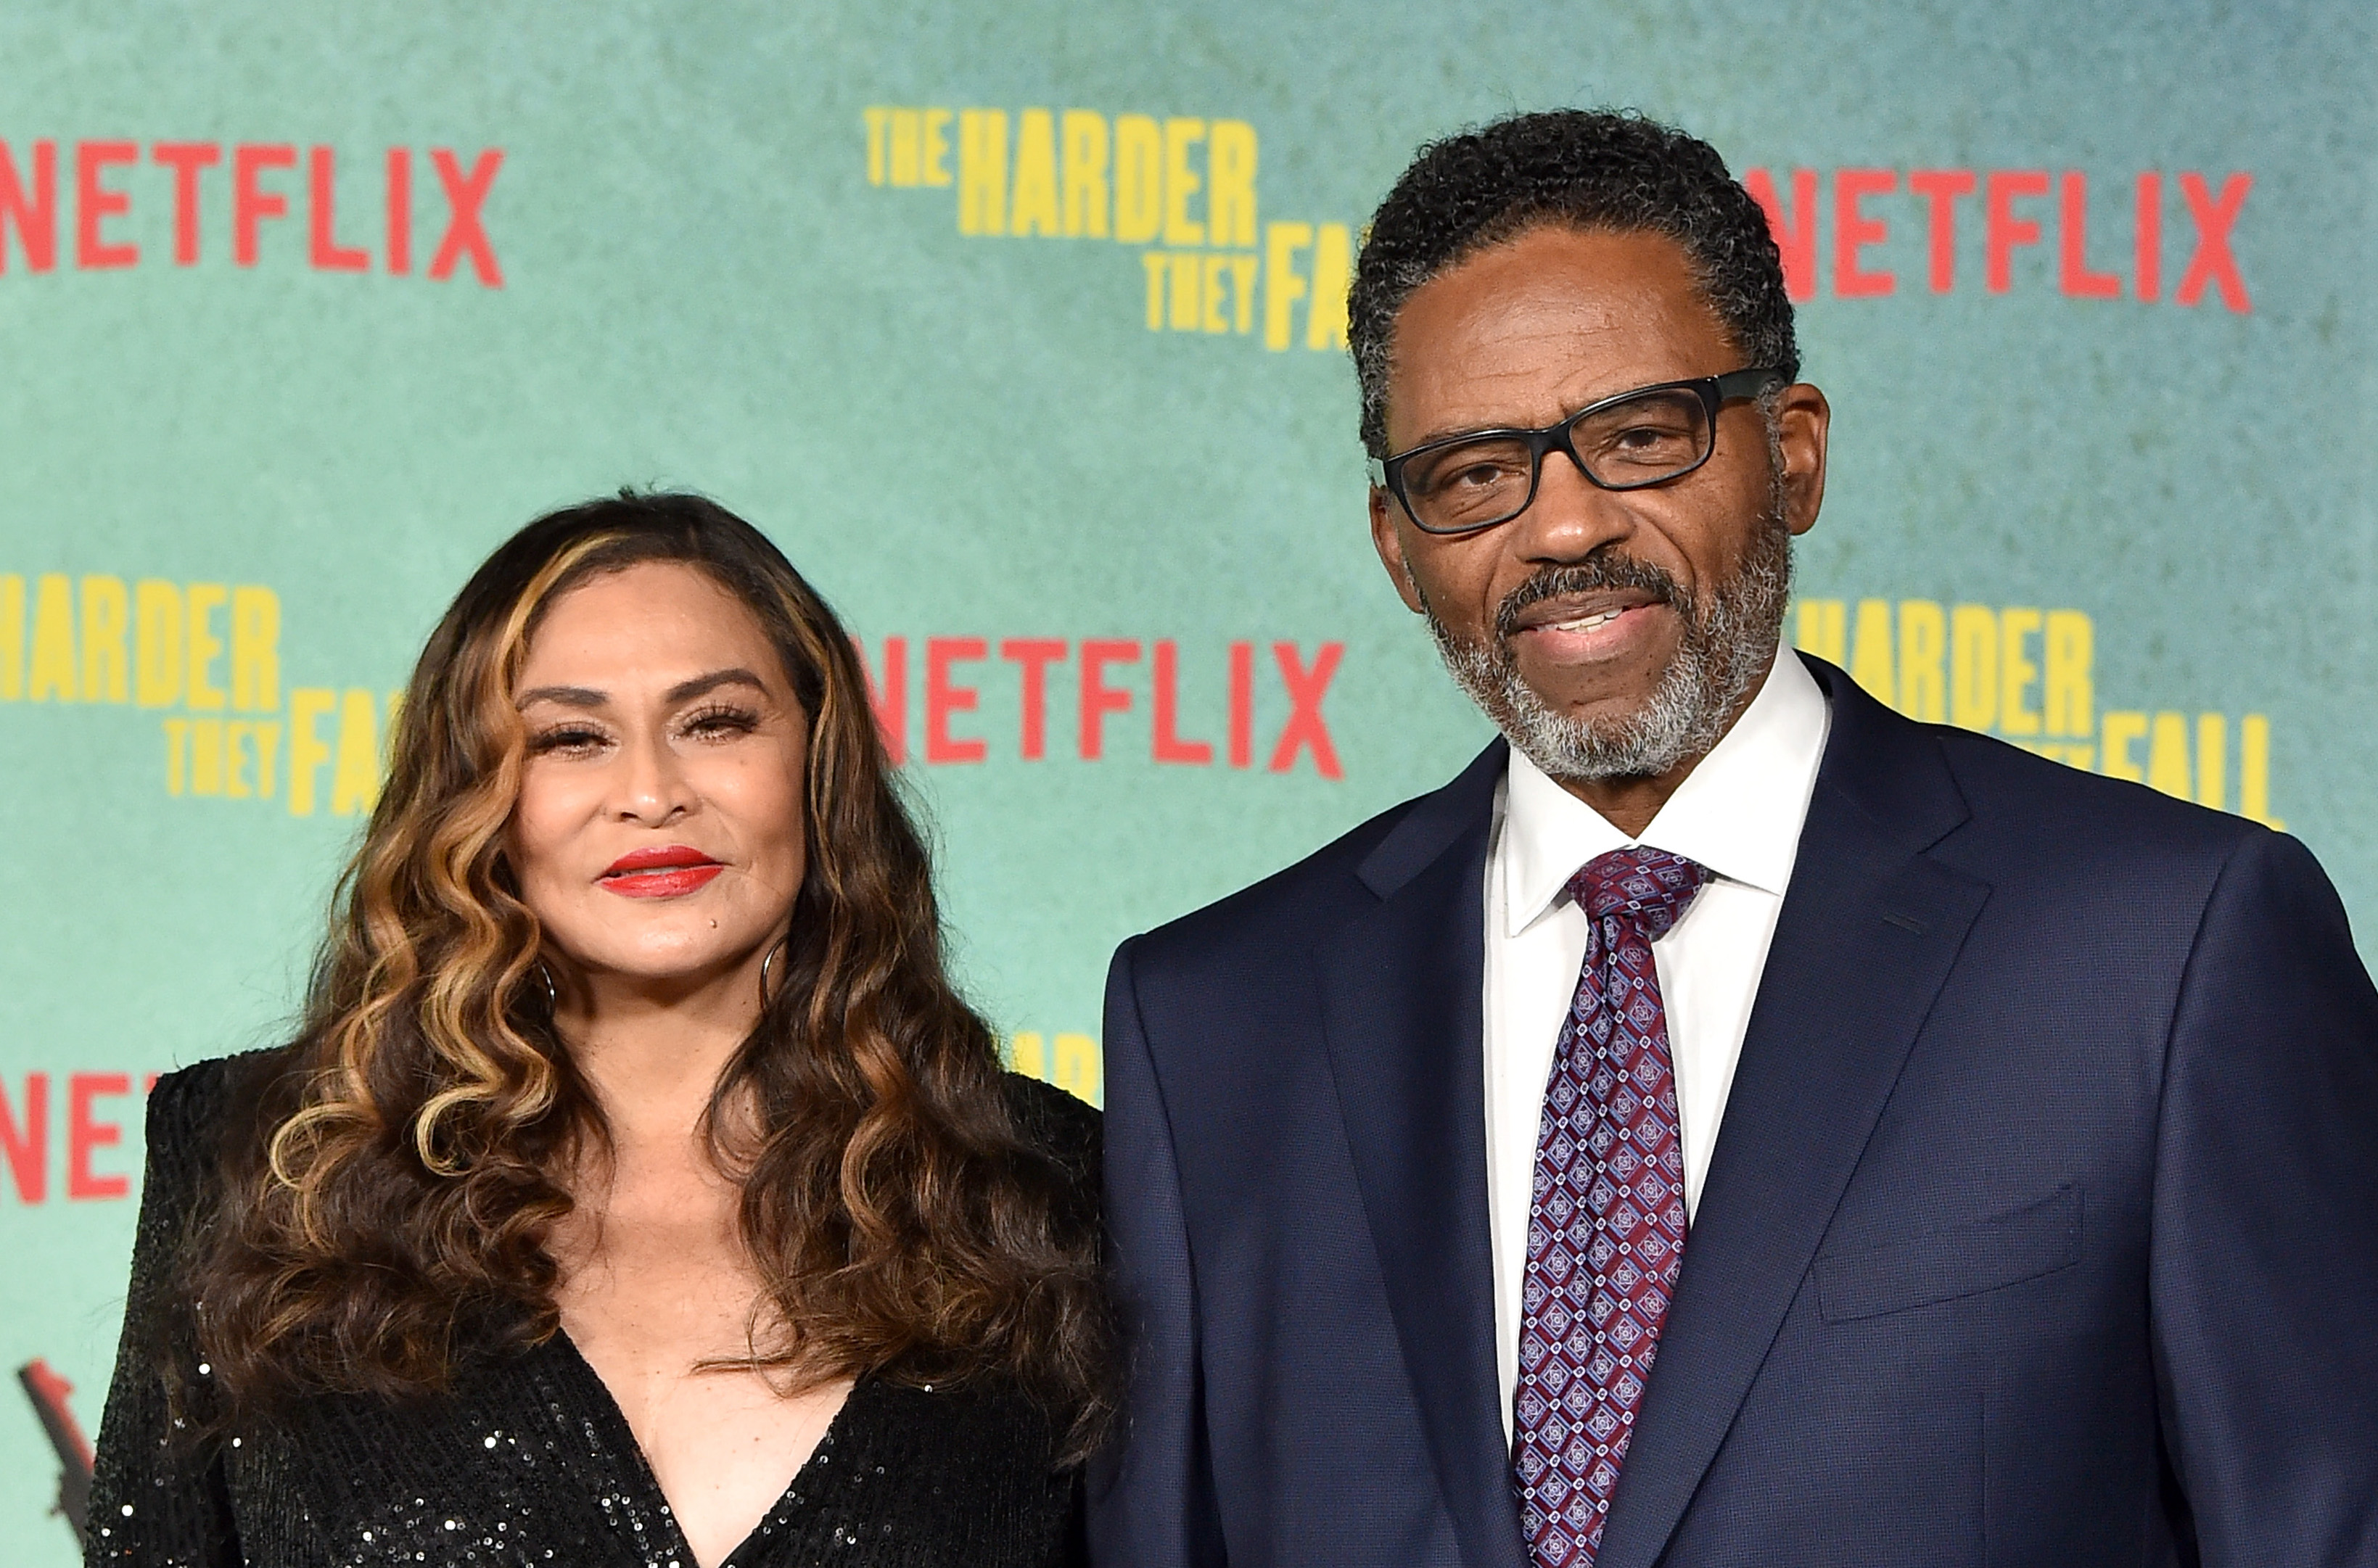 Super Freaky Grandpa??? Richard Lawson Trends Over Alleged Twitter Likes Amid Tina Knowles-Lawson Divorce, Sparks Hilarious Chaos